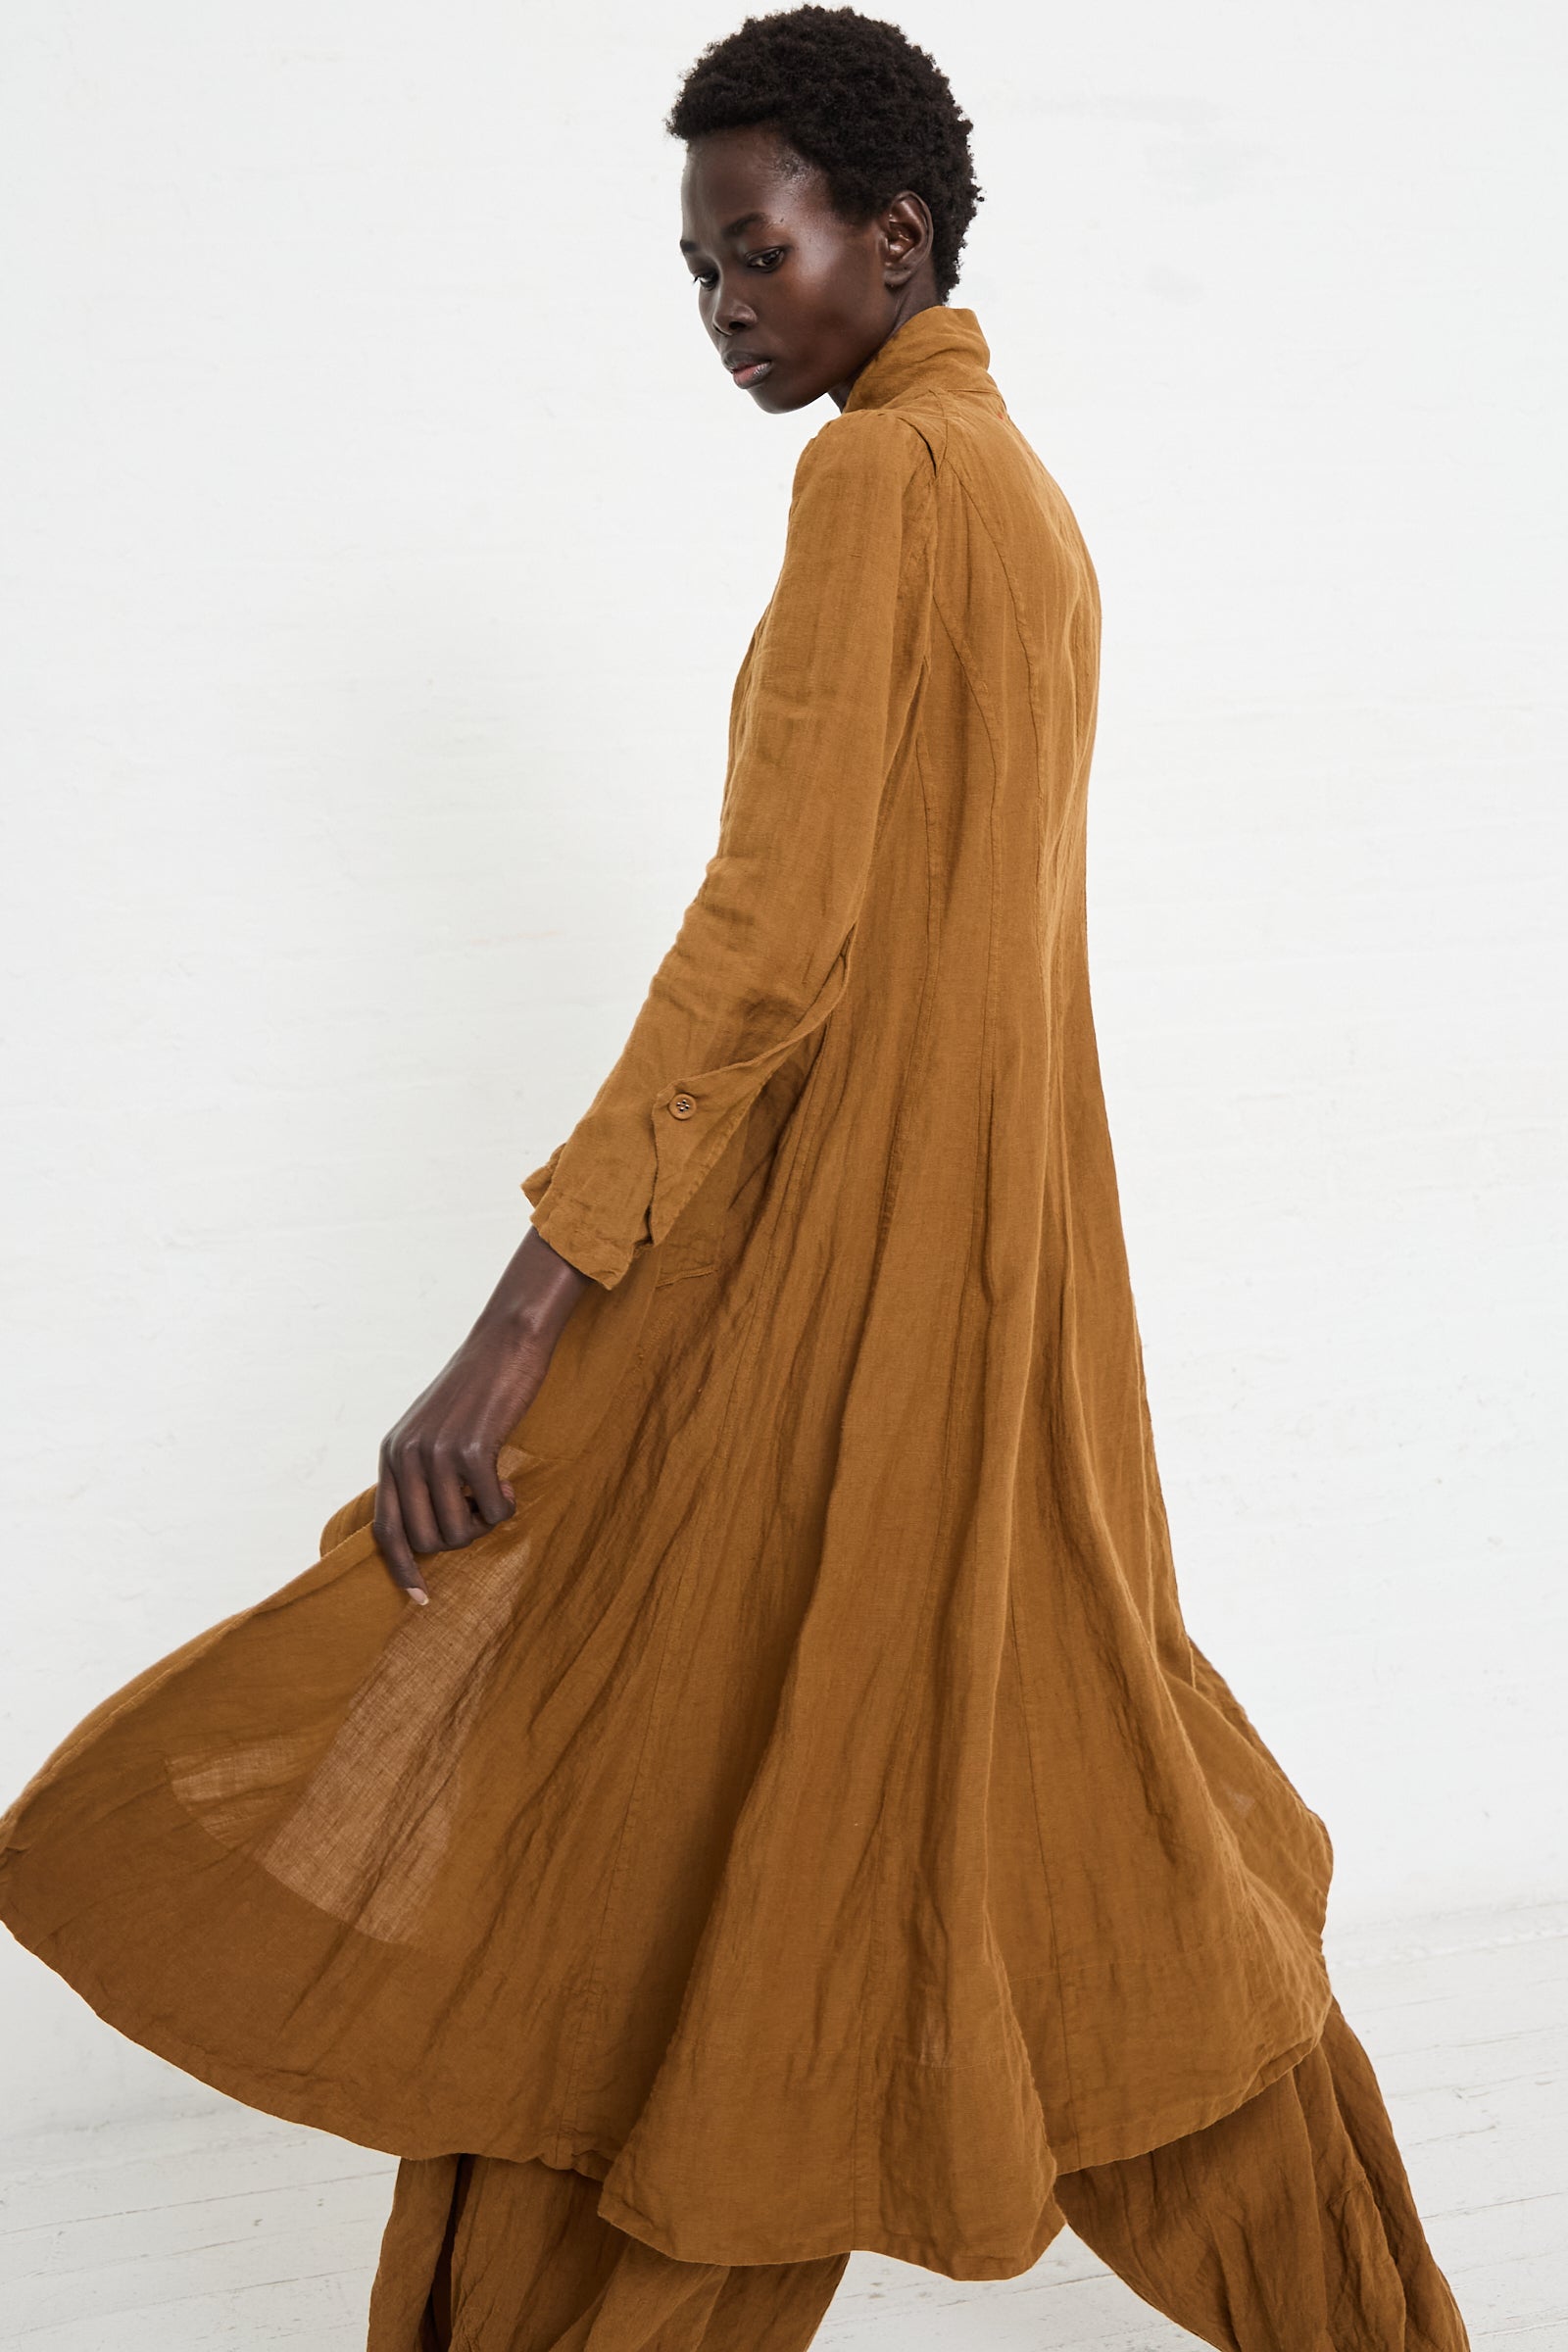 A person with short hair wears a long, flowing brown dress and matching pants, each piece handmade in Kyoto. They walk away from the camera in front of a plain white background, wearing the Linen Manteau de Pompier 1800's in Coffee by Hallelujah.